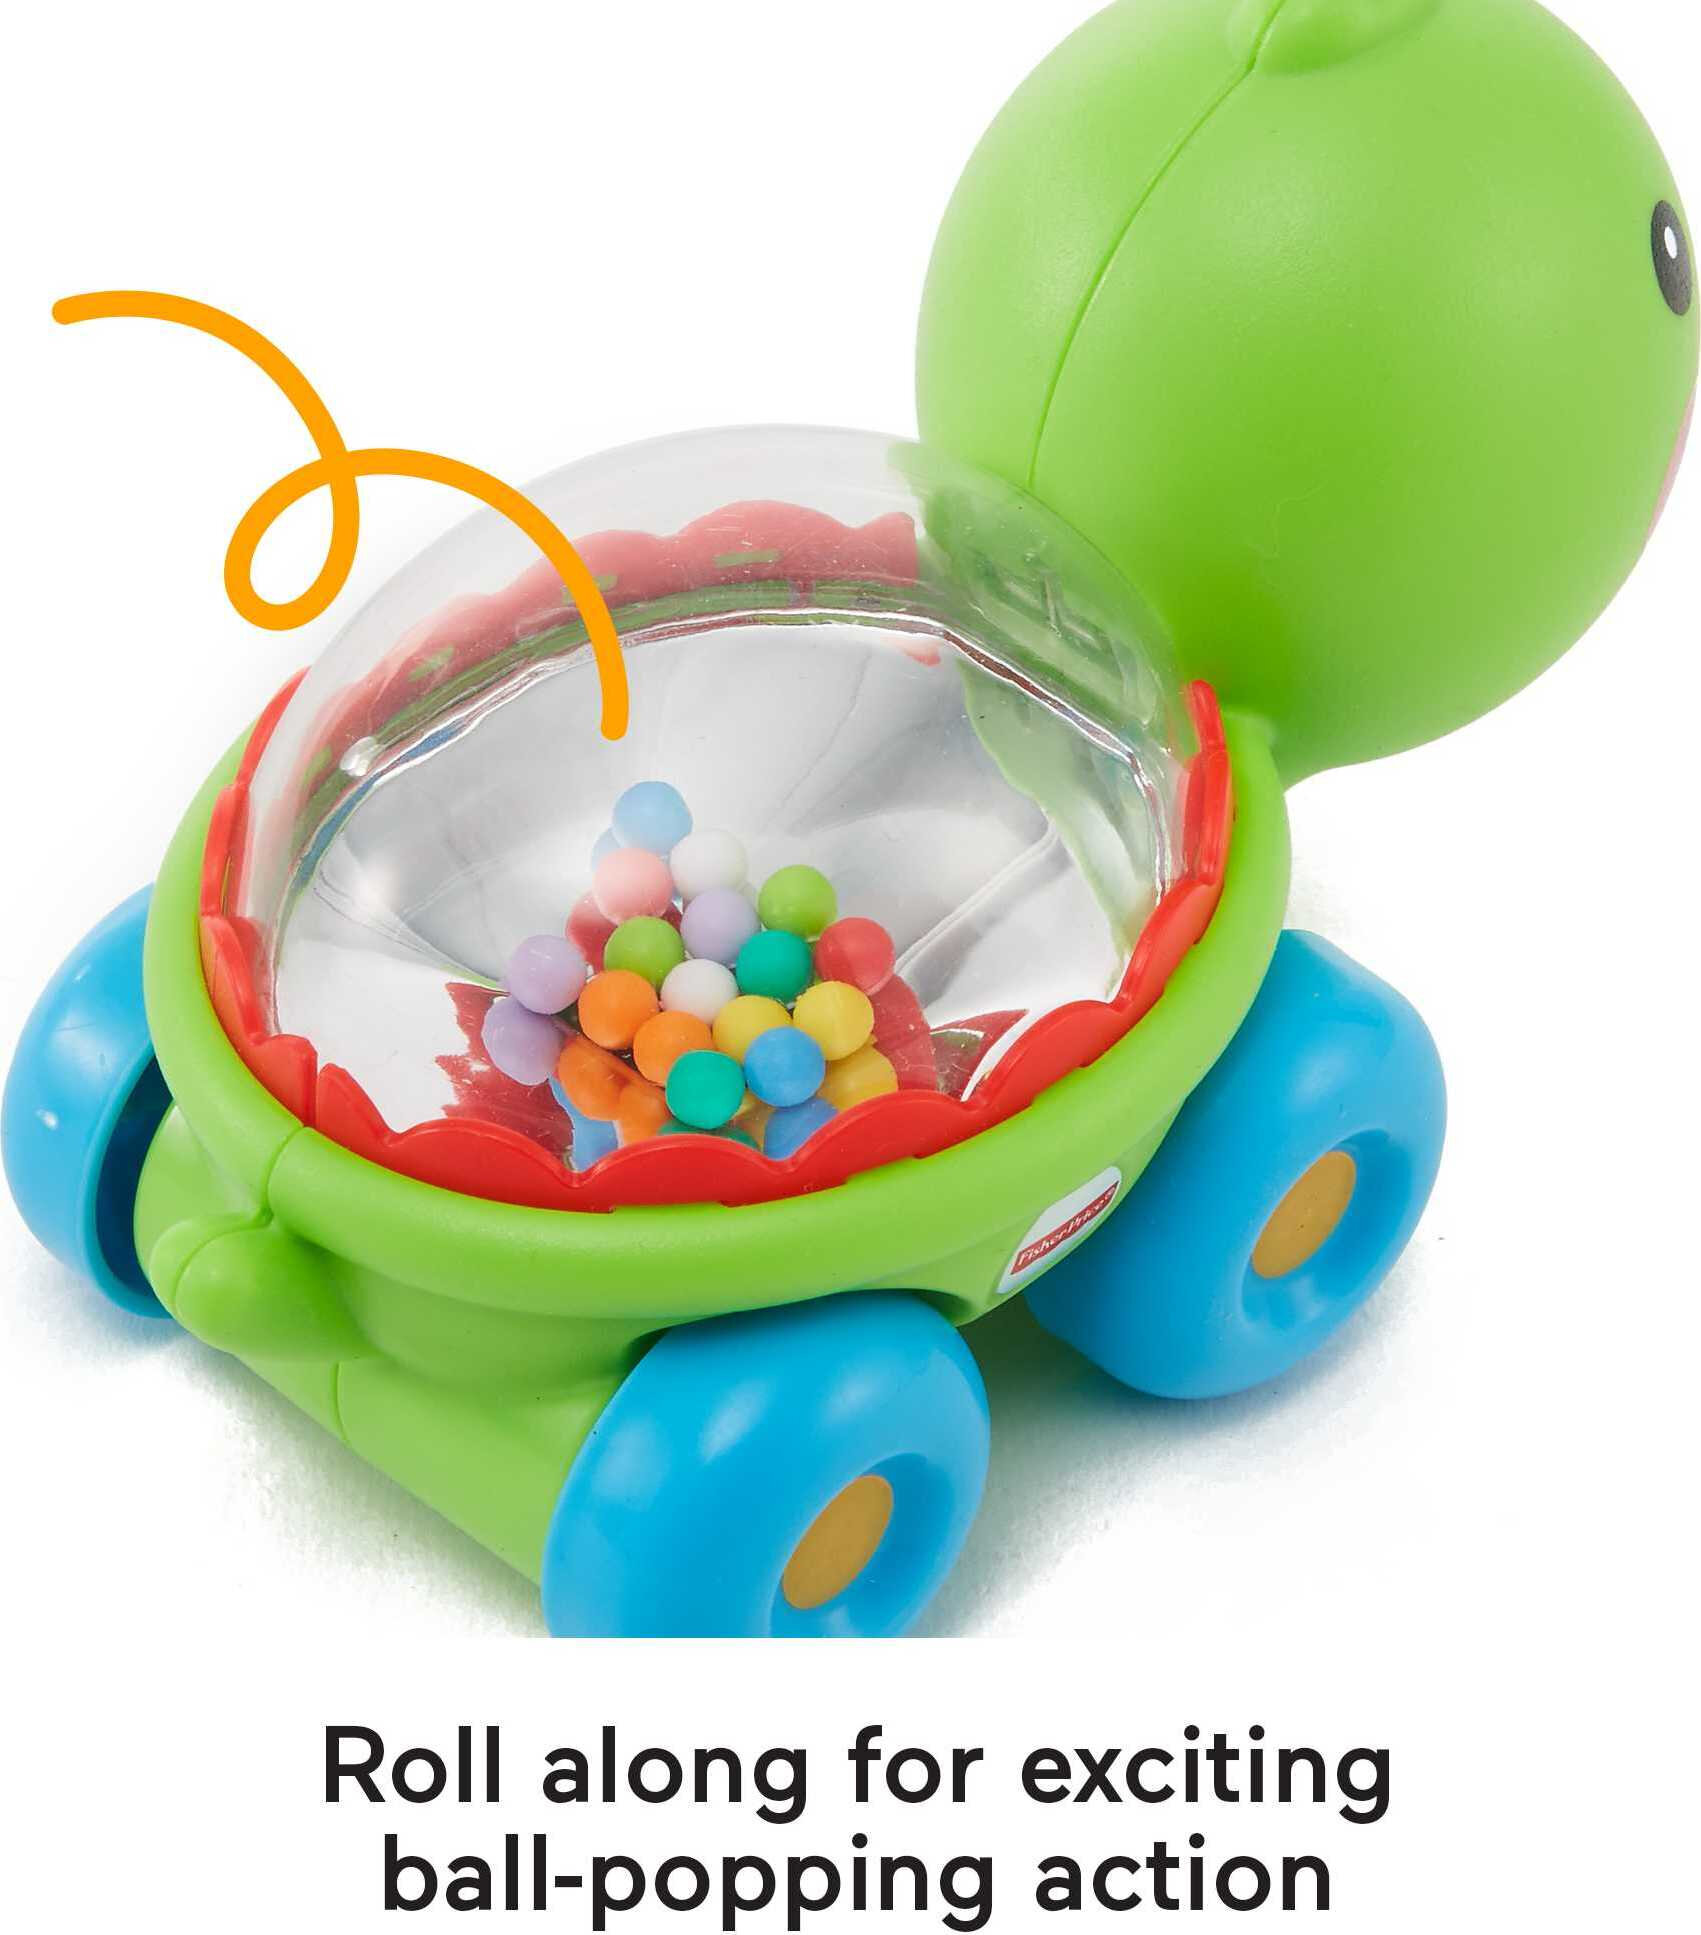 Fisher-Price Poppity Pop Turtle Push-Along Vehicle with Sounds for Infant Crawling Play - image 3 of 6